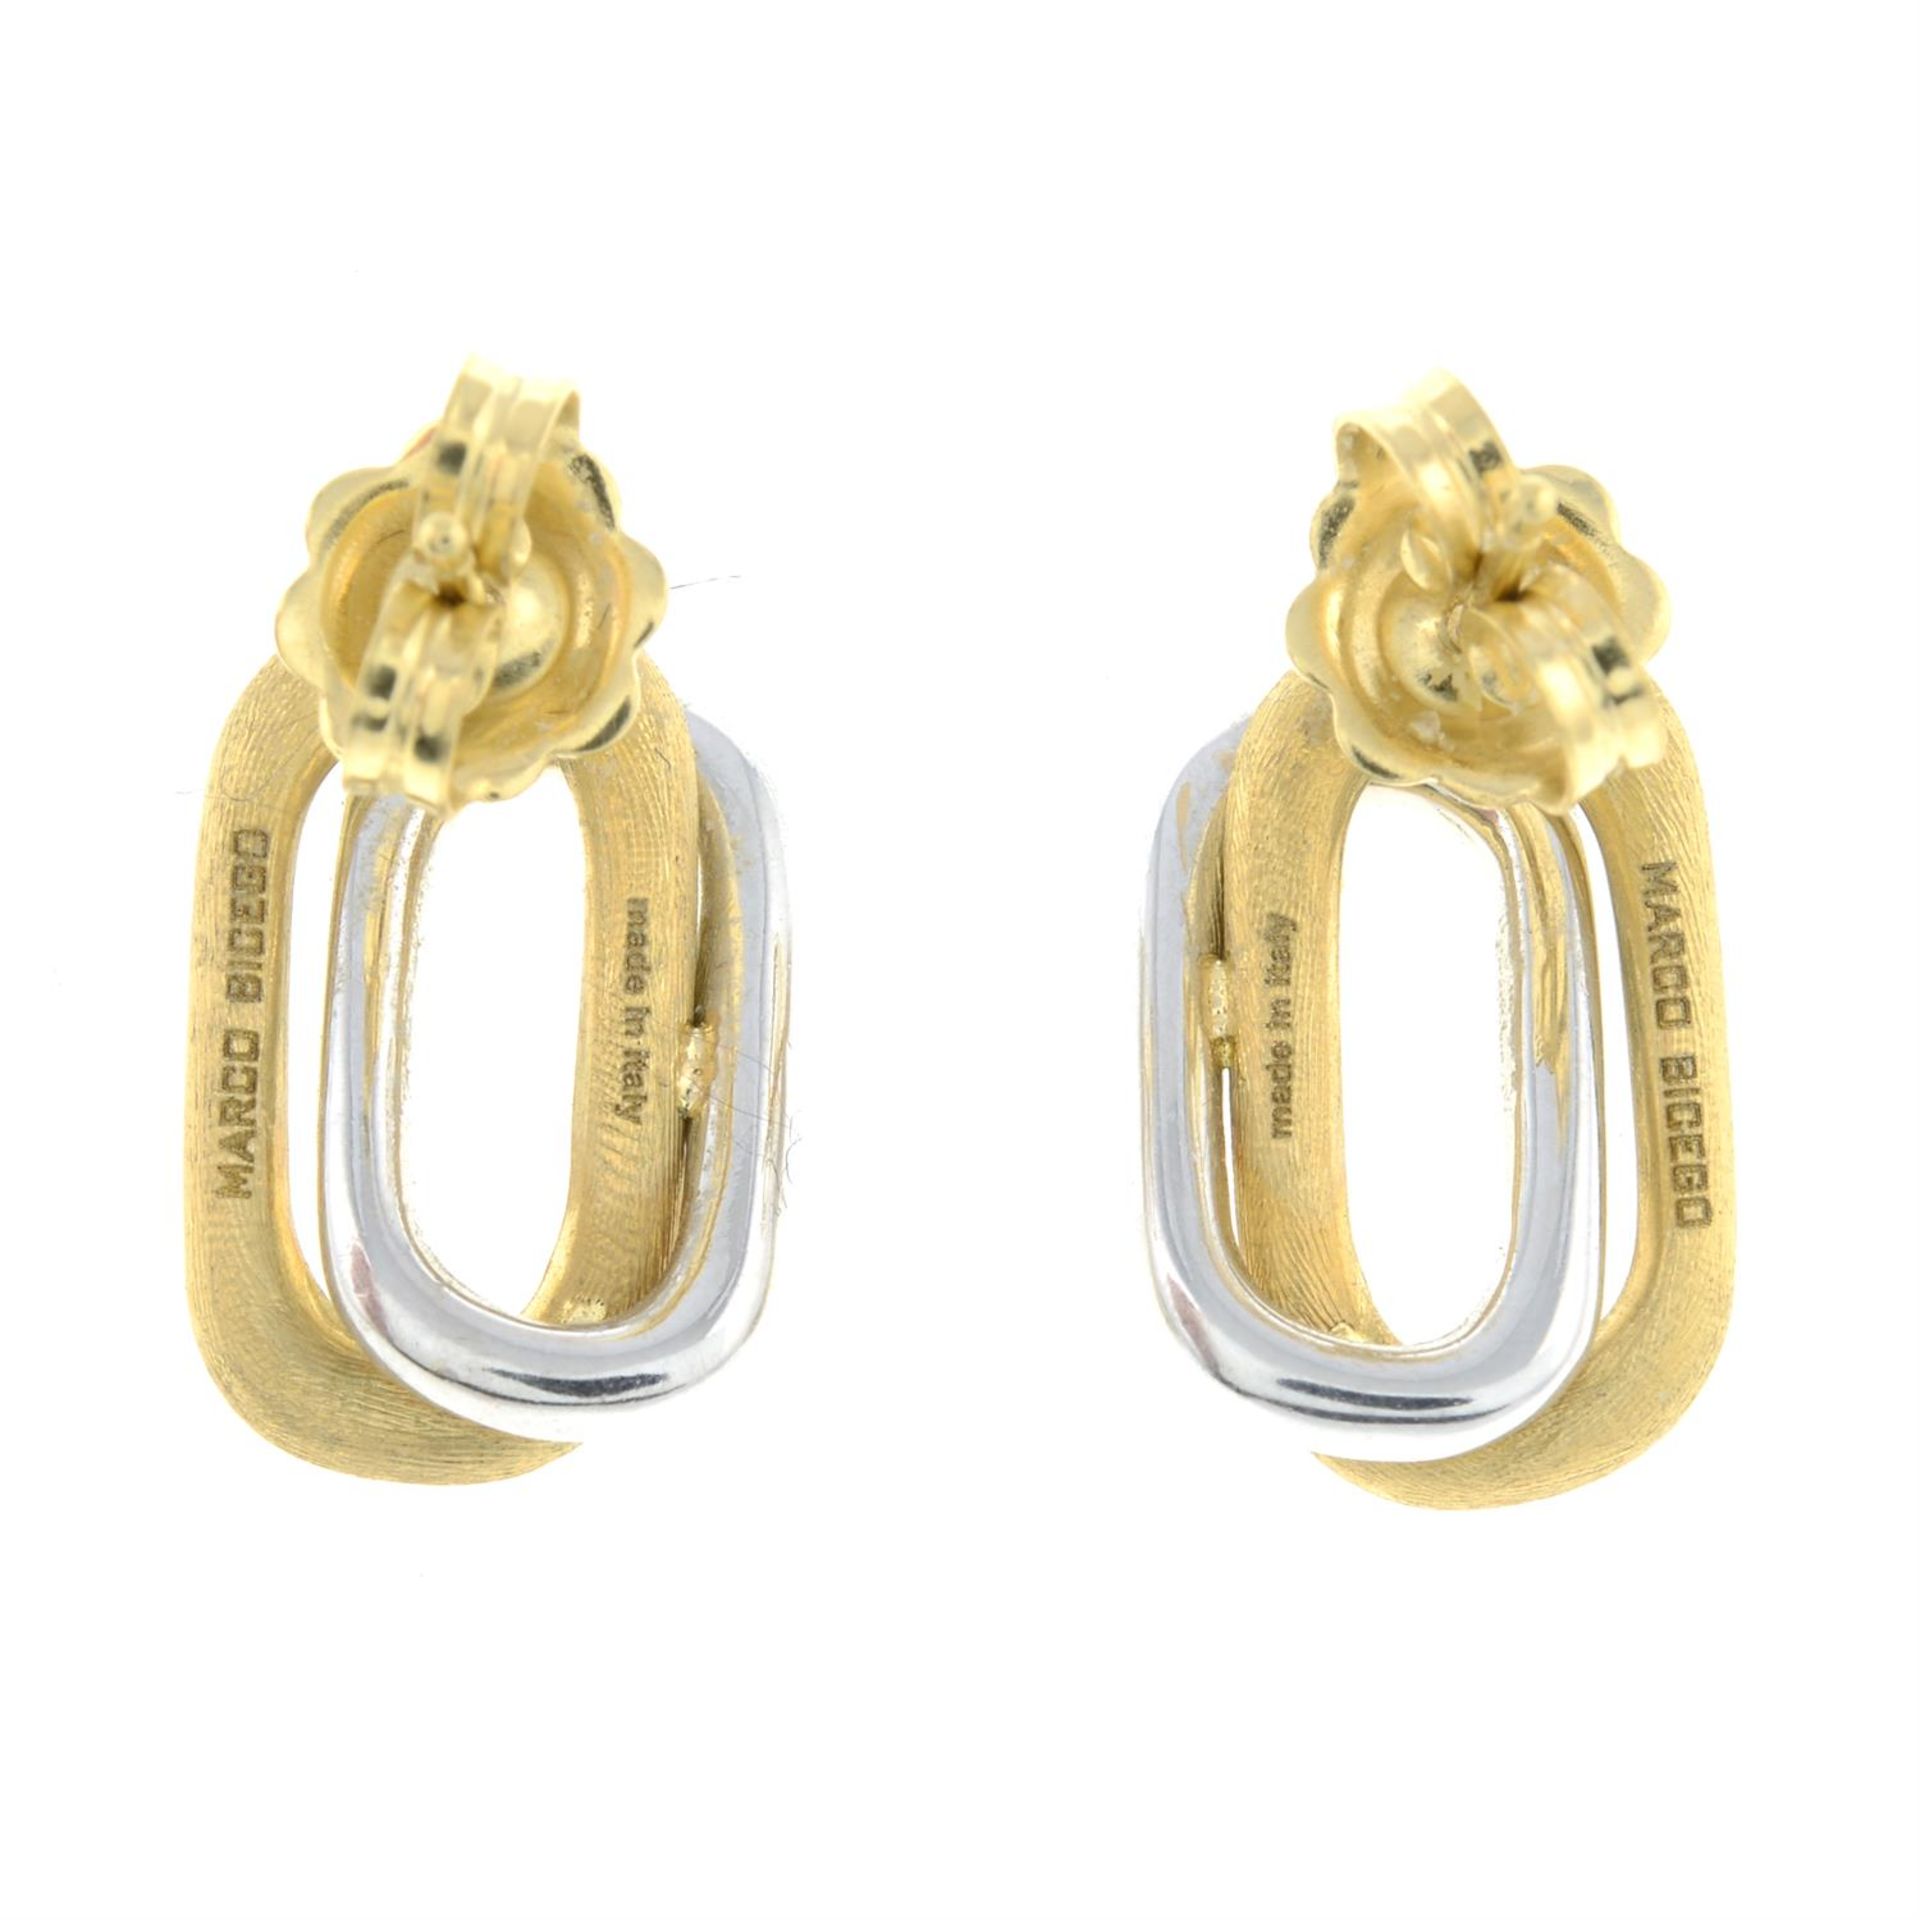 A pair of 18ct gold pavé-set diamond rectangular earrings, by Marco Bicego. - Image 2 of 2